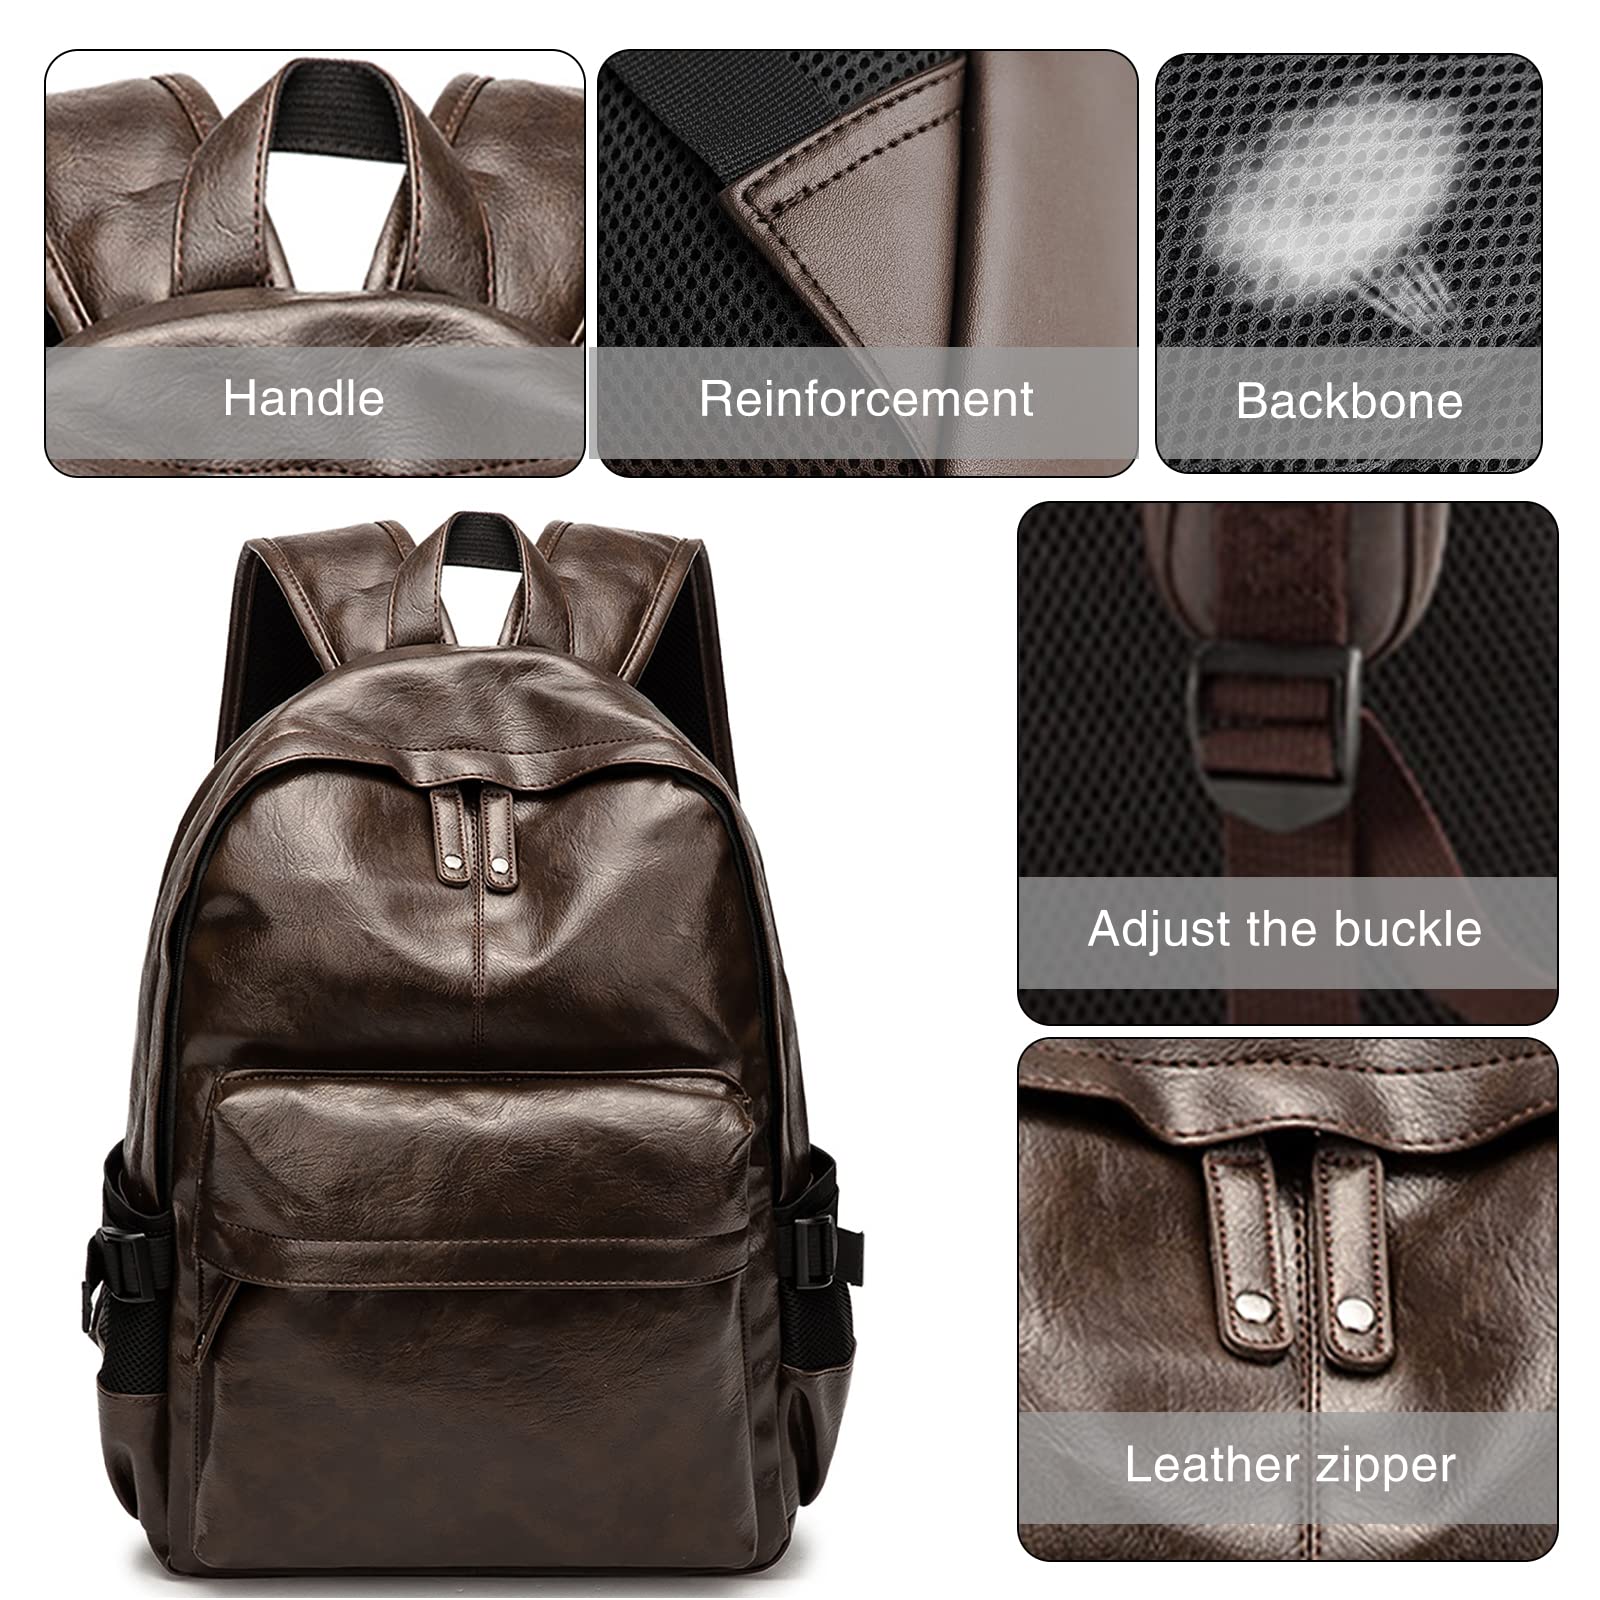 Leather Laptop Backpack for Men Wowen, School College Bookbag Casual Travel Daypack (Brown)